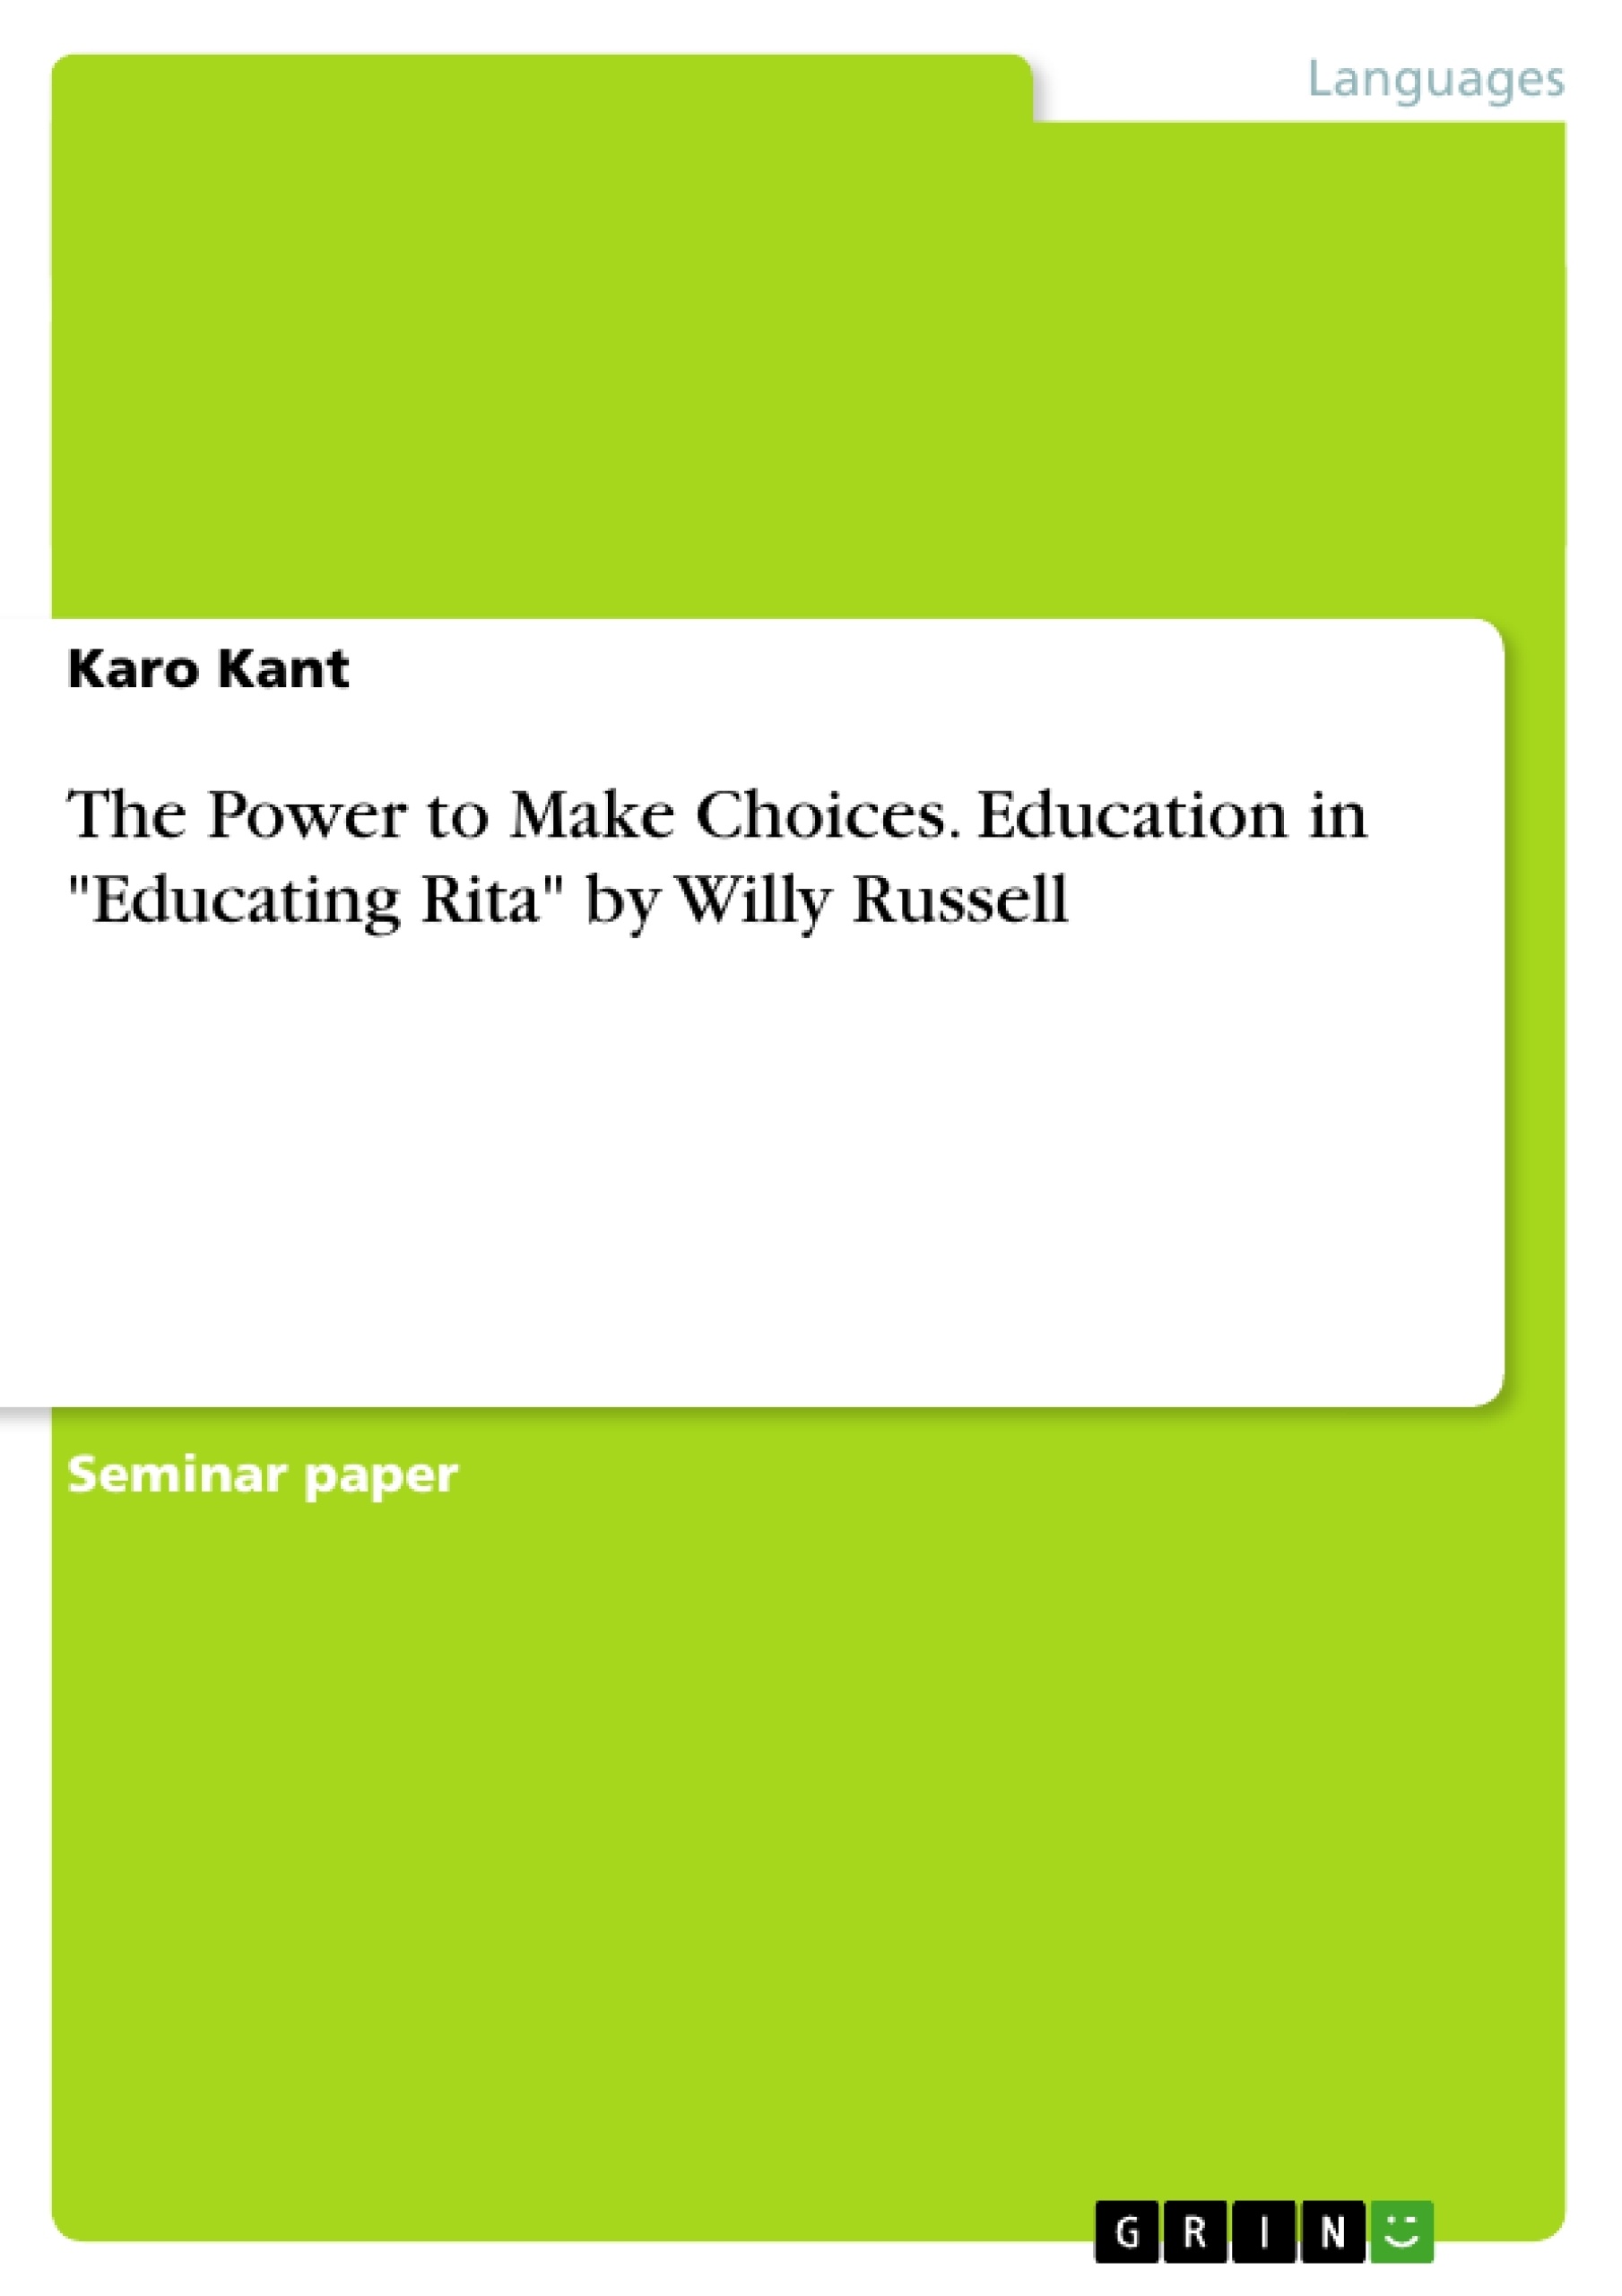 Titre: The Power to Make Choices. Education in "Educating Rita" by Willy Russell